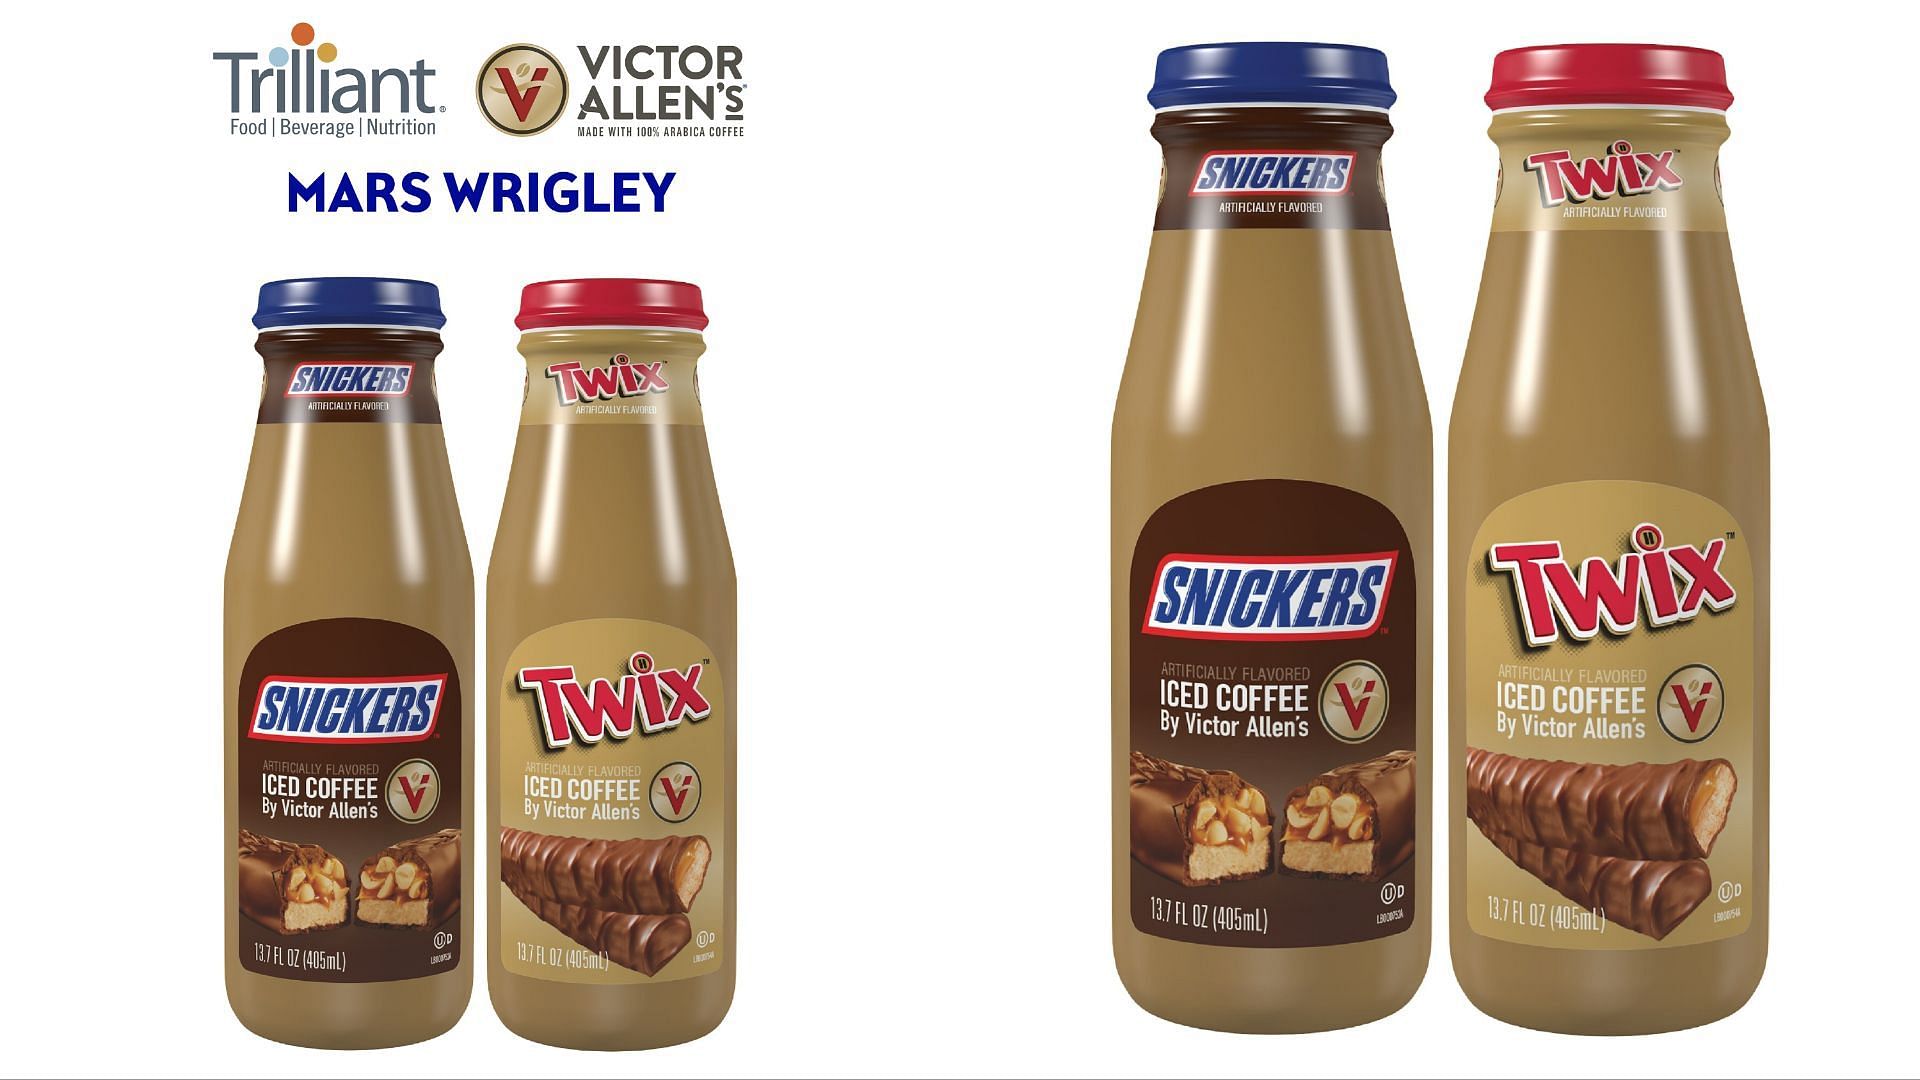 Victor Allen&#039;s has introduced two new variants of Snickers and Twix iced coffee beverages (Image via Victor Allen&#039;s/Mars Wrigley)